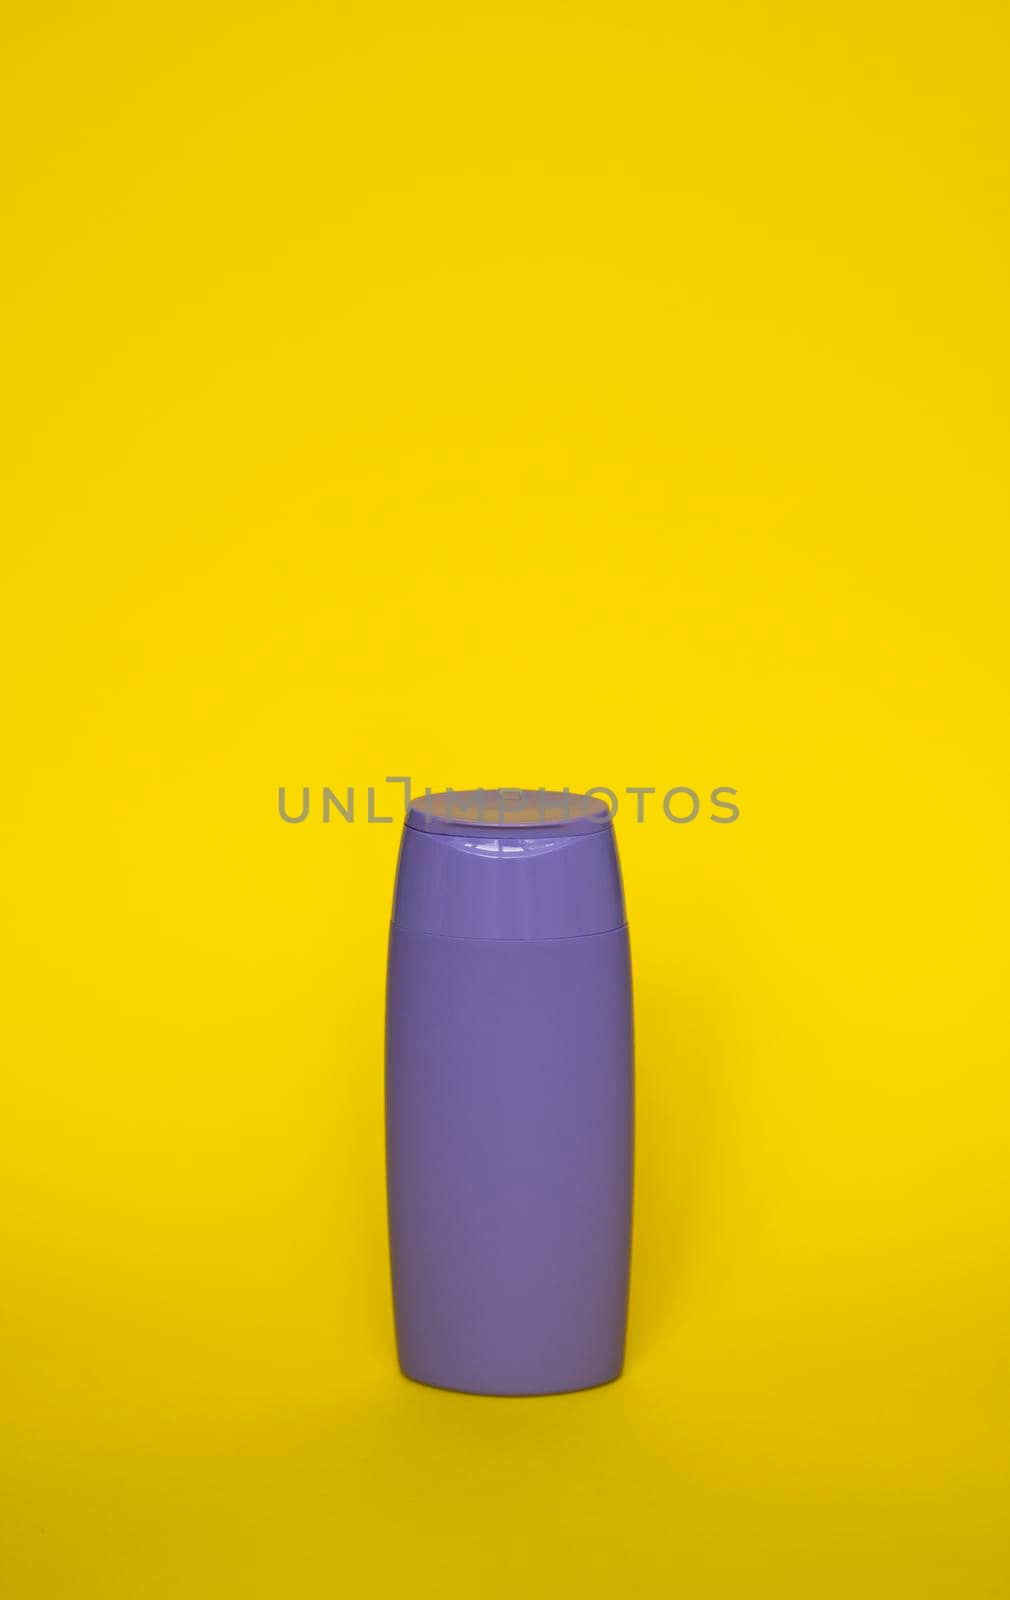 Violet plastic shampoo bottle isolated on yellow background. Skin care lotion. Bathing essential product. Shampoo bottle. Bath and body lotion. Fine liquid hand wash